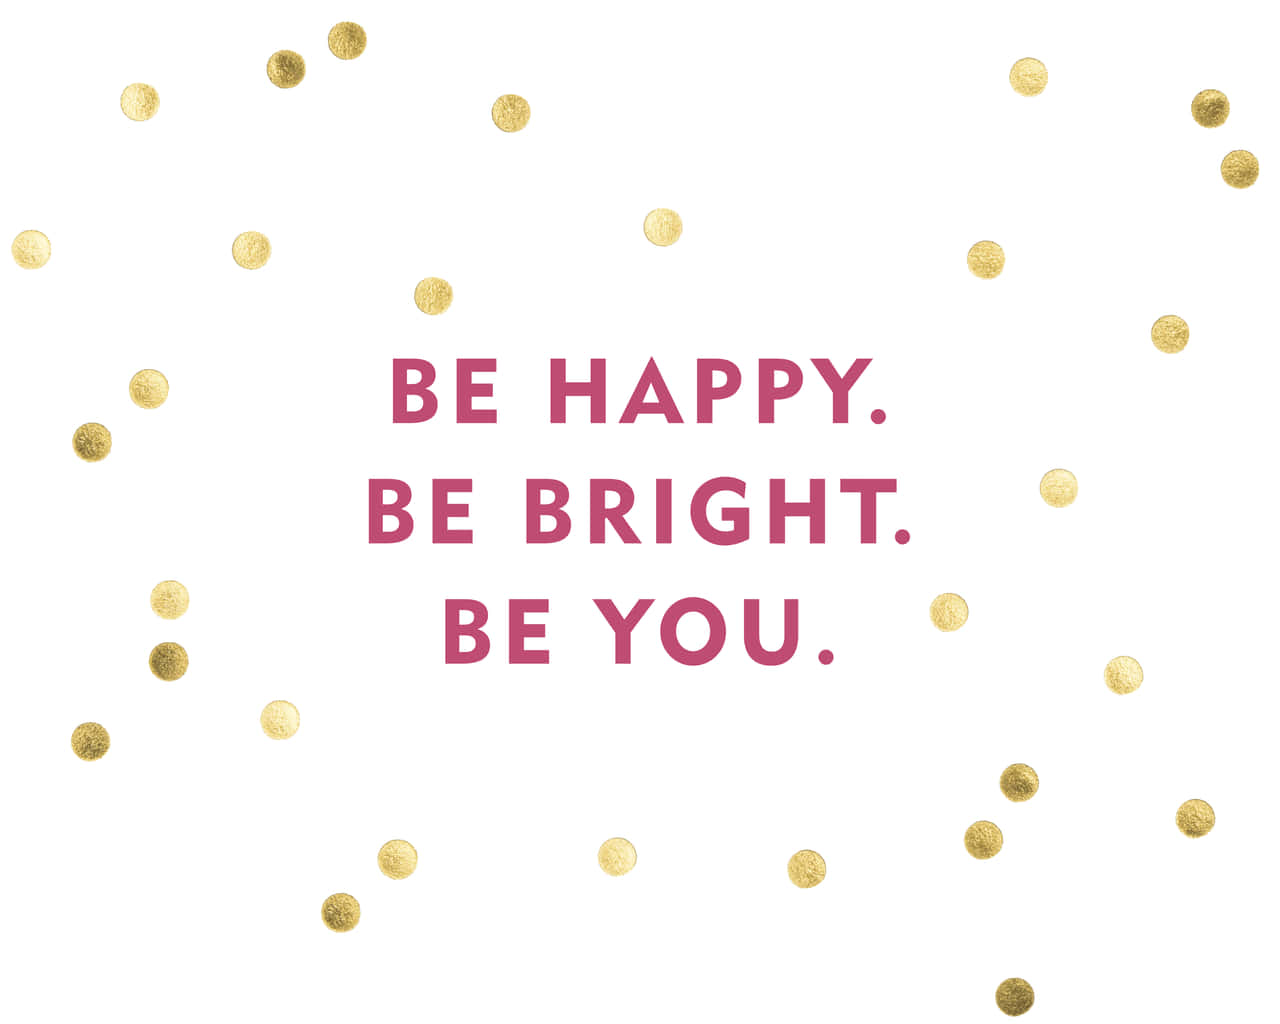 Be bright be beautiful. Be Bright. Be Happy be Bright be you. Обои be Happy. Be Happy be Bright фразы.